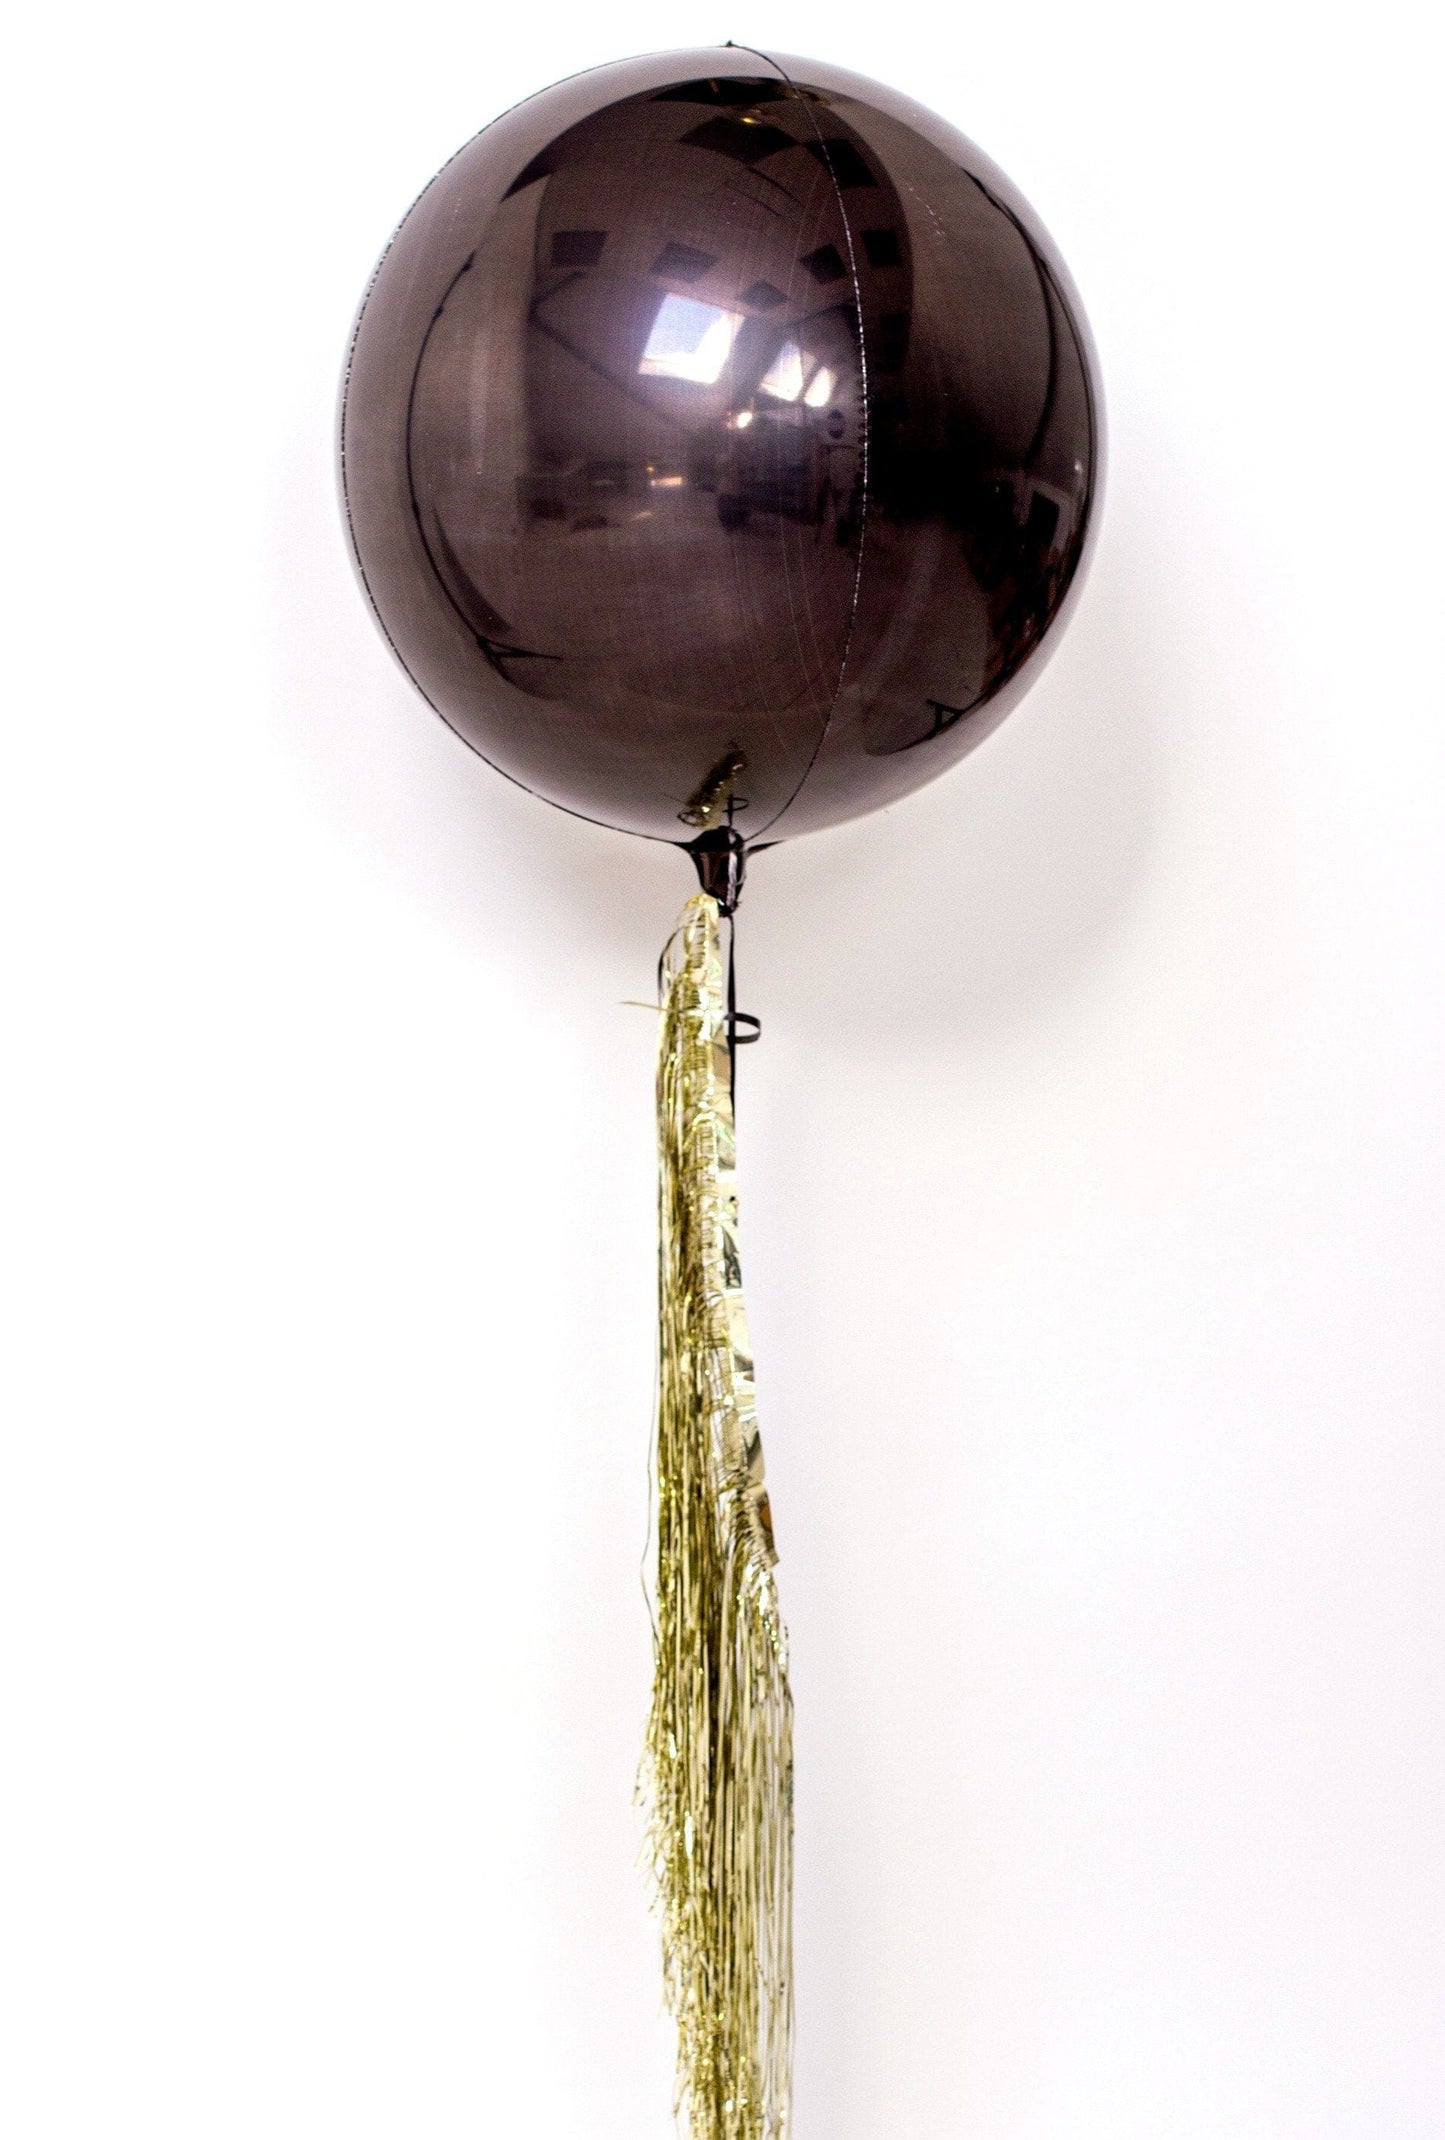 Black Orb Balloons 16" | Orbz Balloons | Helium Balloons for Events Amscan